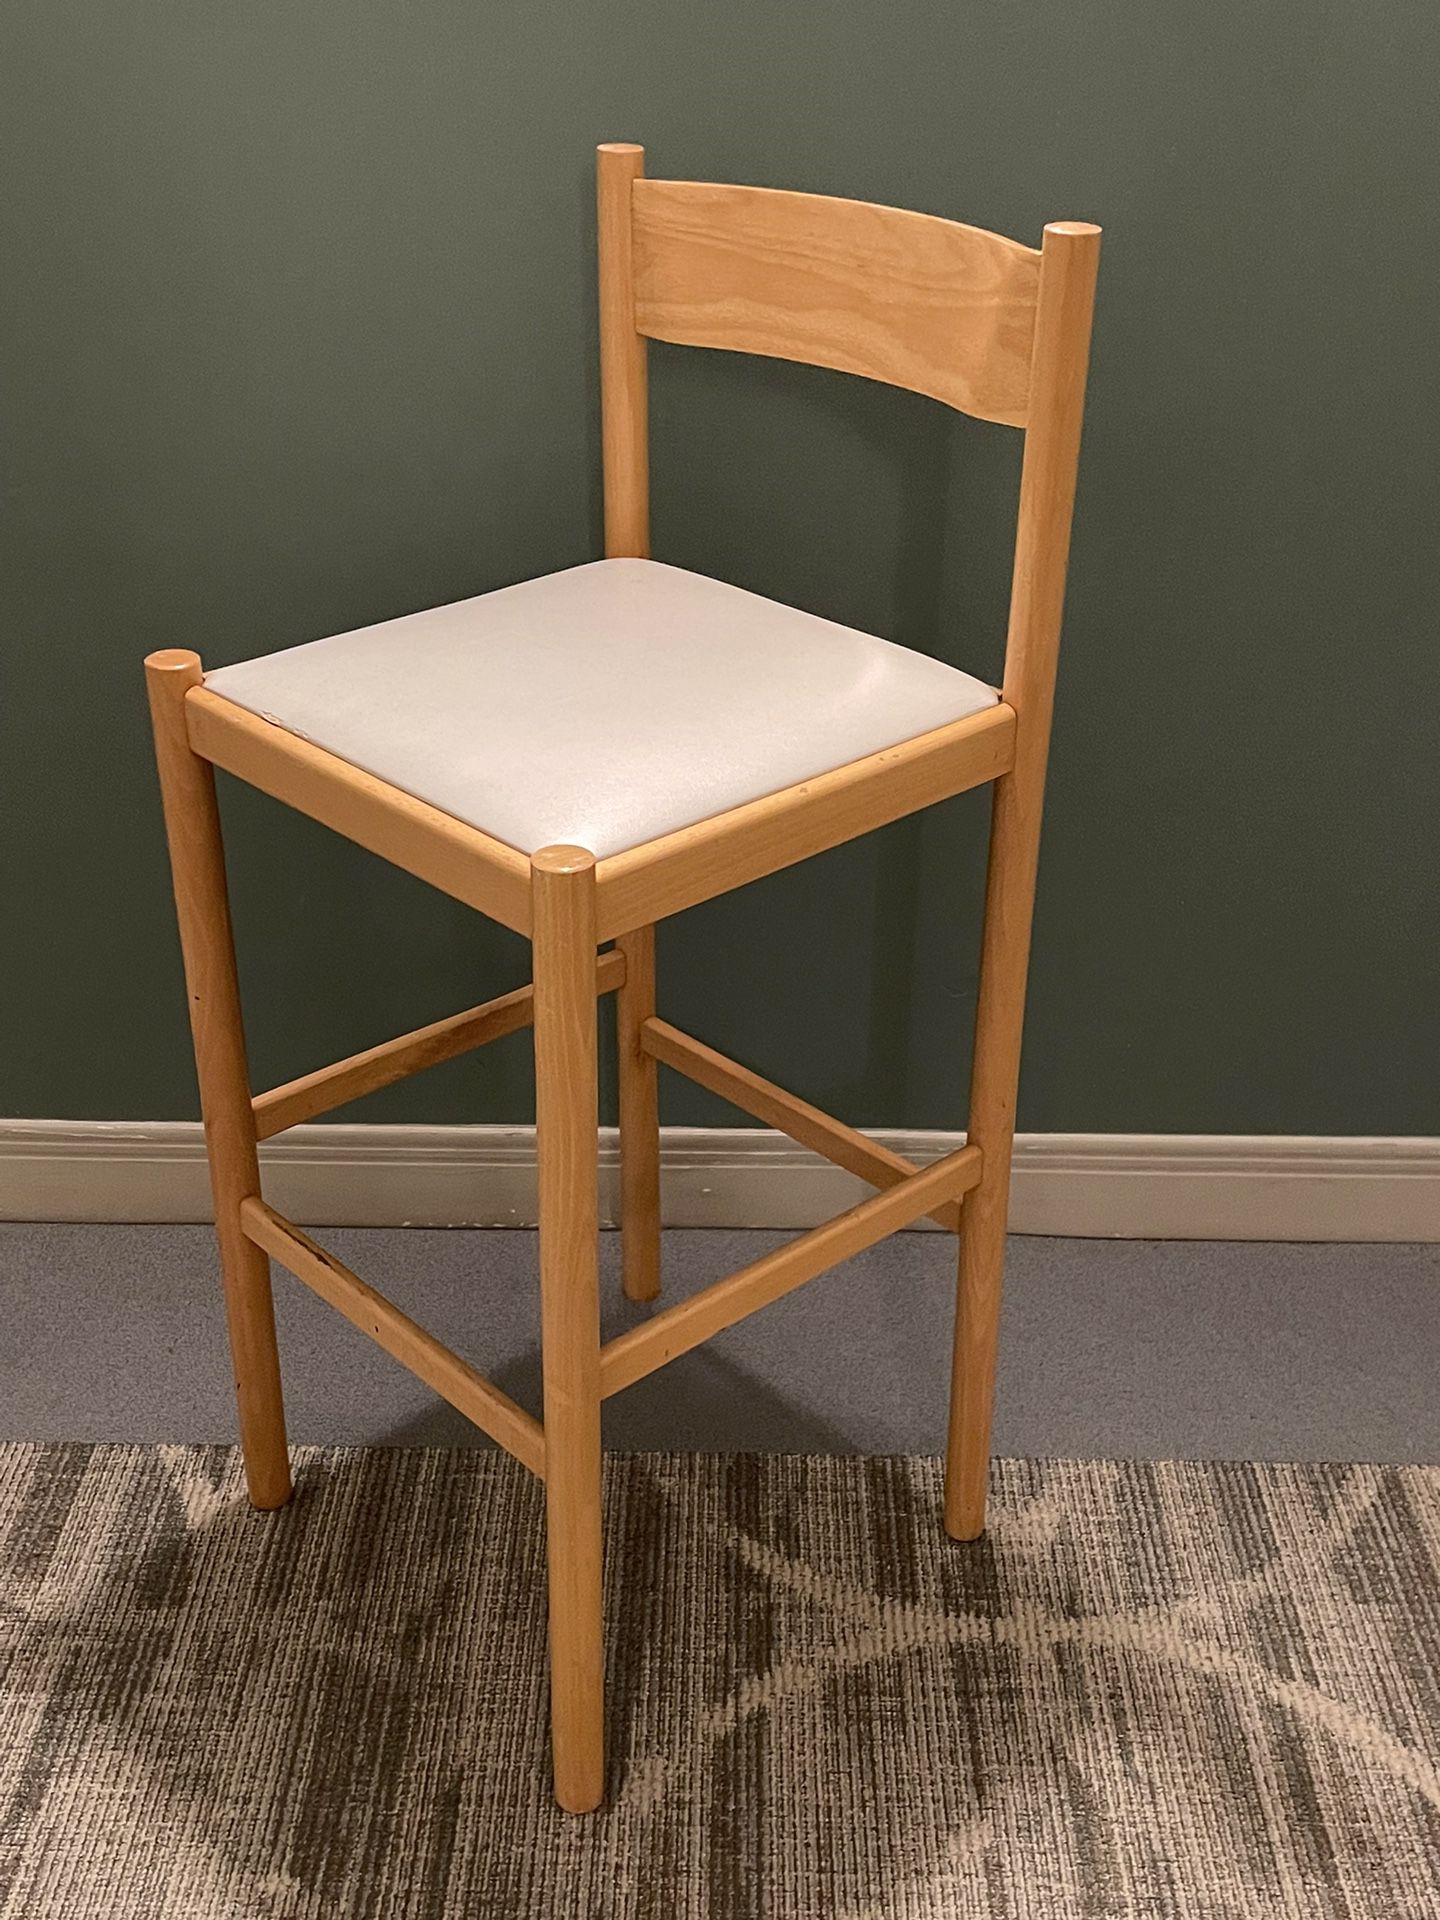 Beautiful, Strong, High STOOL  (39"H floor to top of seat back) - Polished BLONDE WOOD - firm price